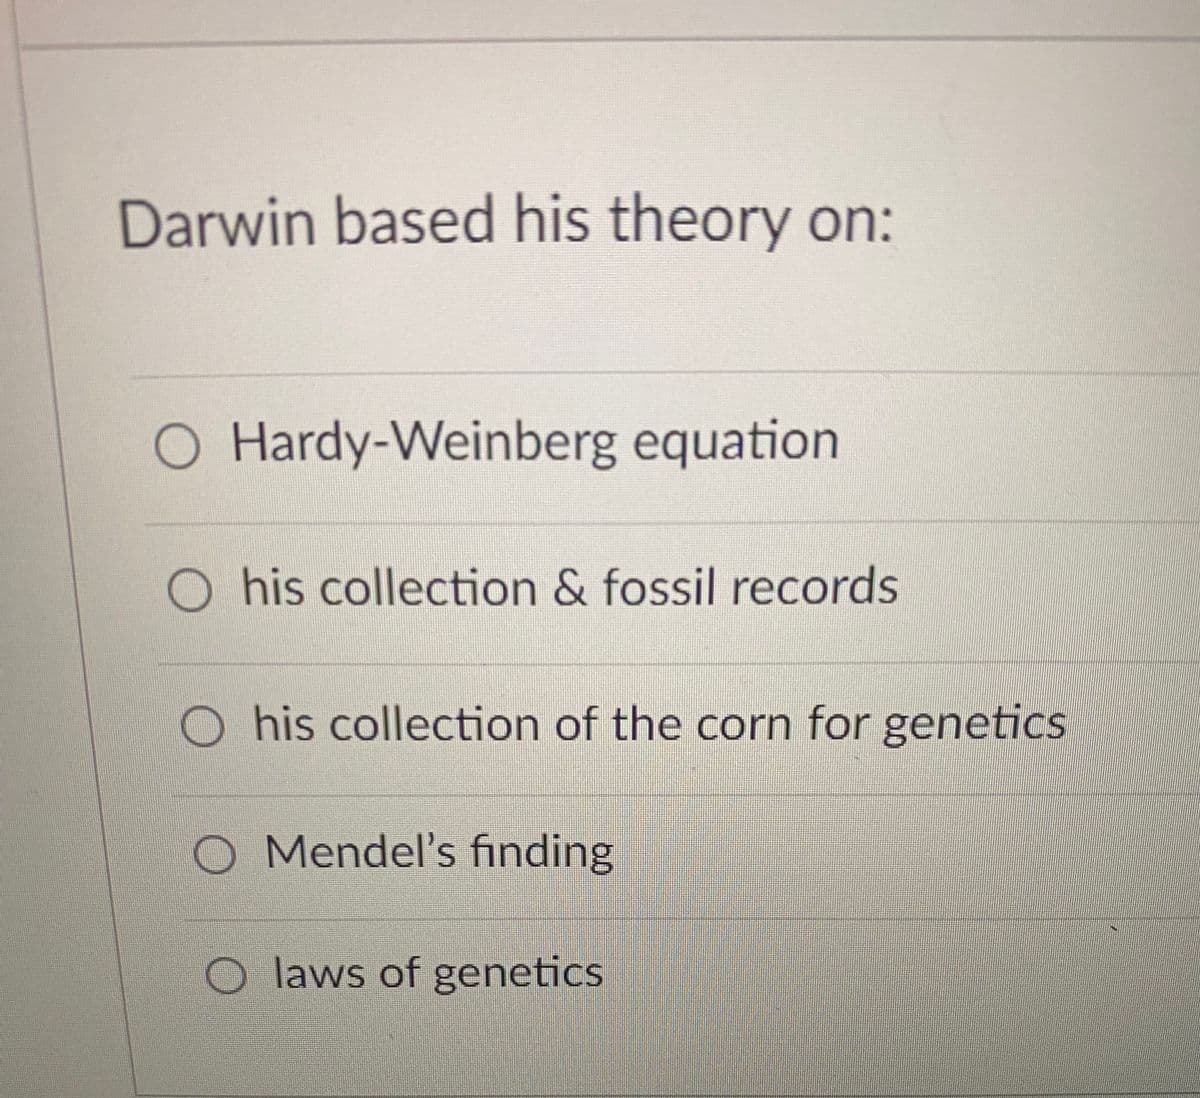 Darwin based his theory on:
O Hardy-Weinberg equation
O his collection & fossil records
O his collection of the corn for geneticS
O Mendel's finding
O laws of genetics
